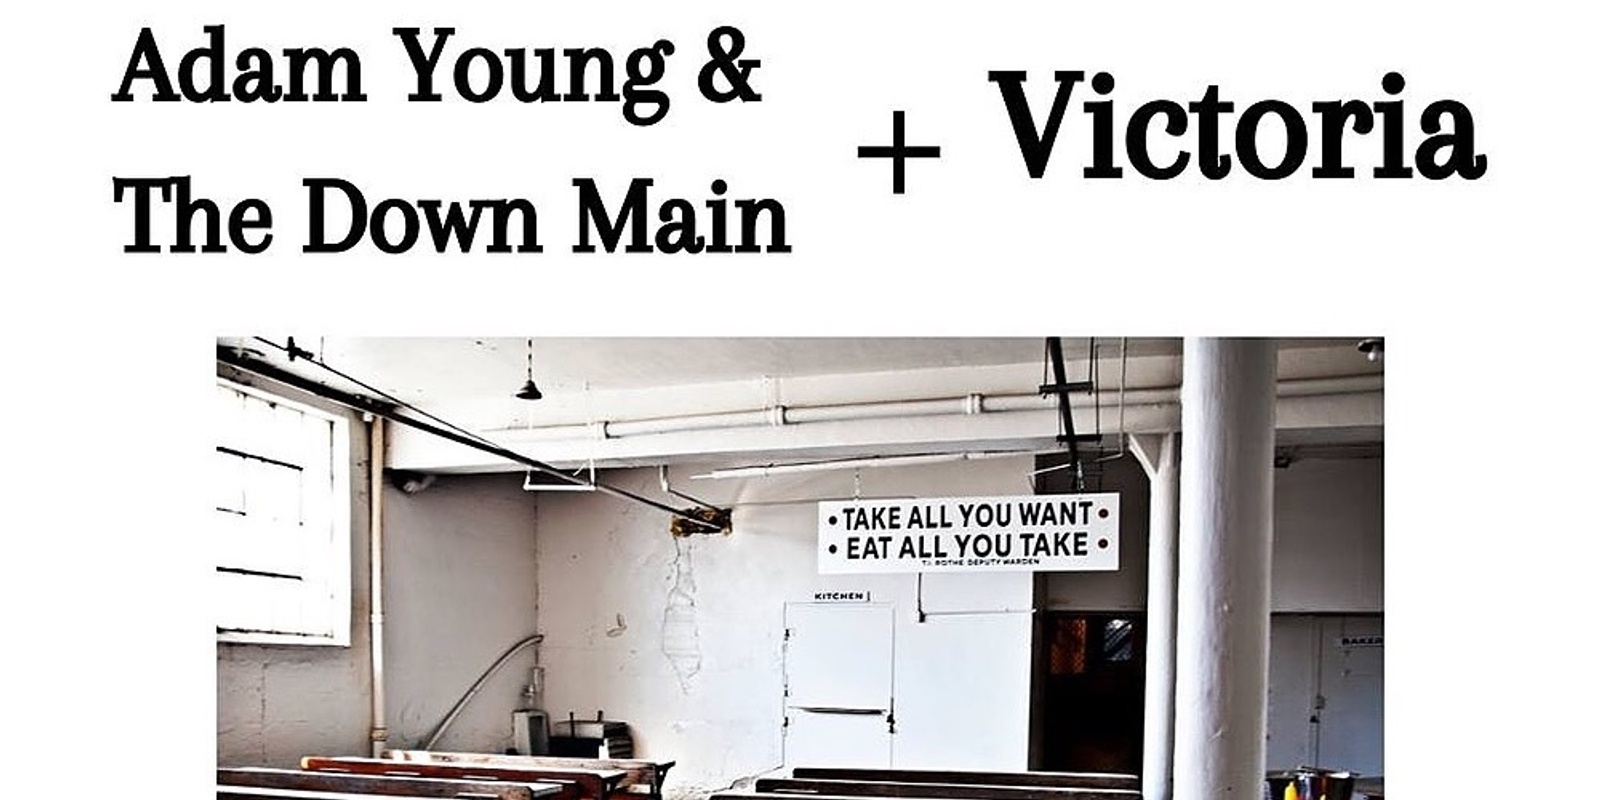 Banner image for Adam Young & The Down Main + Victoria